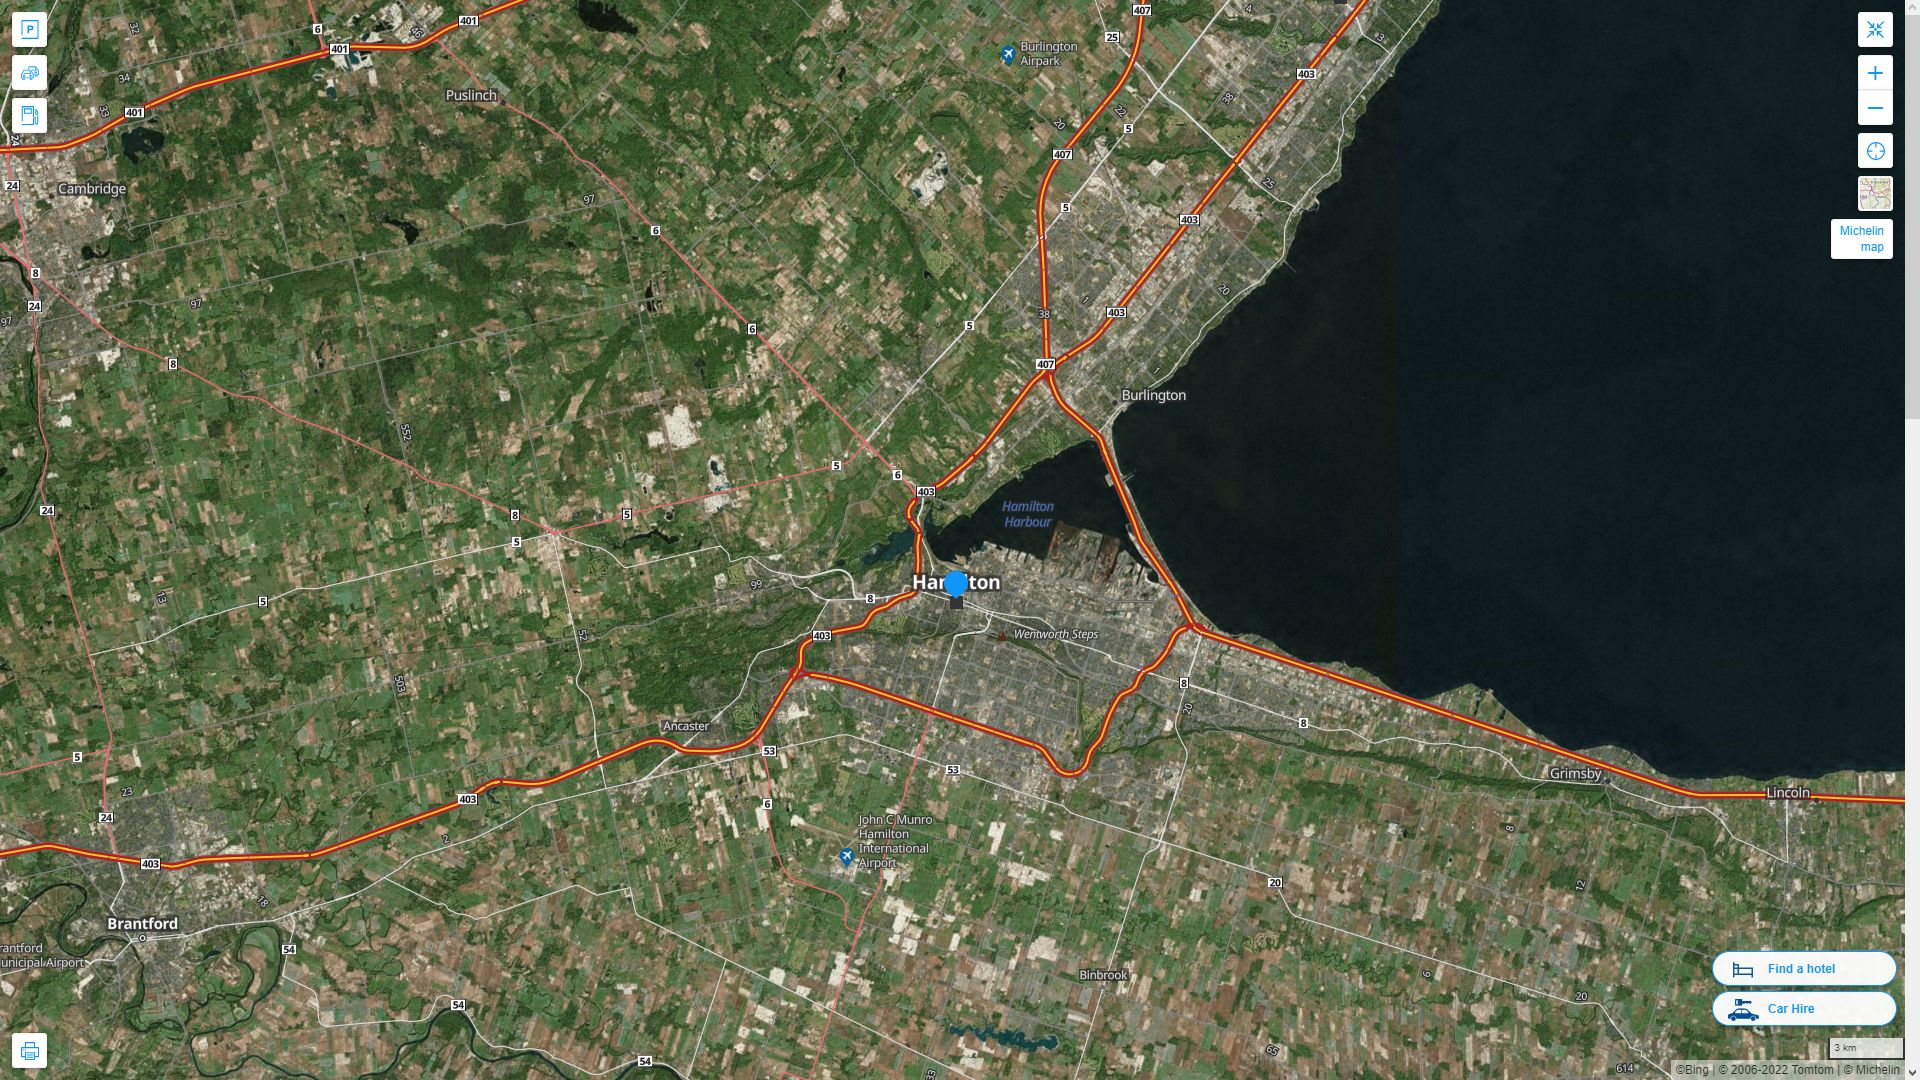 Hamilton Highway and Road Map with Satellite View